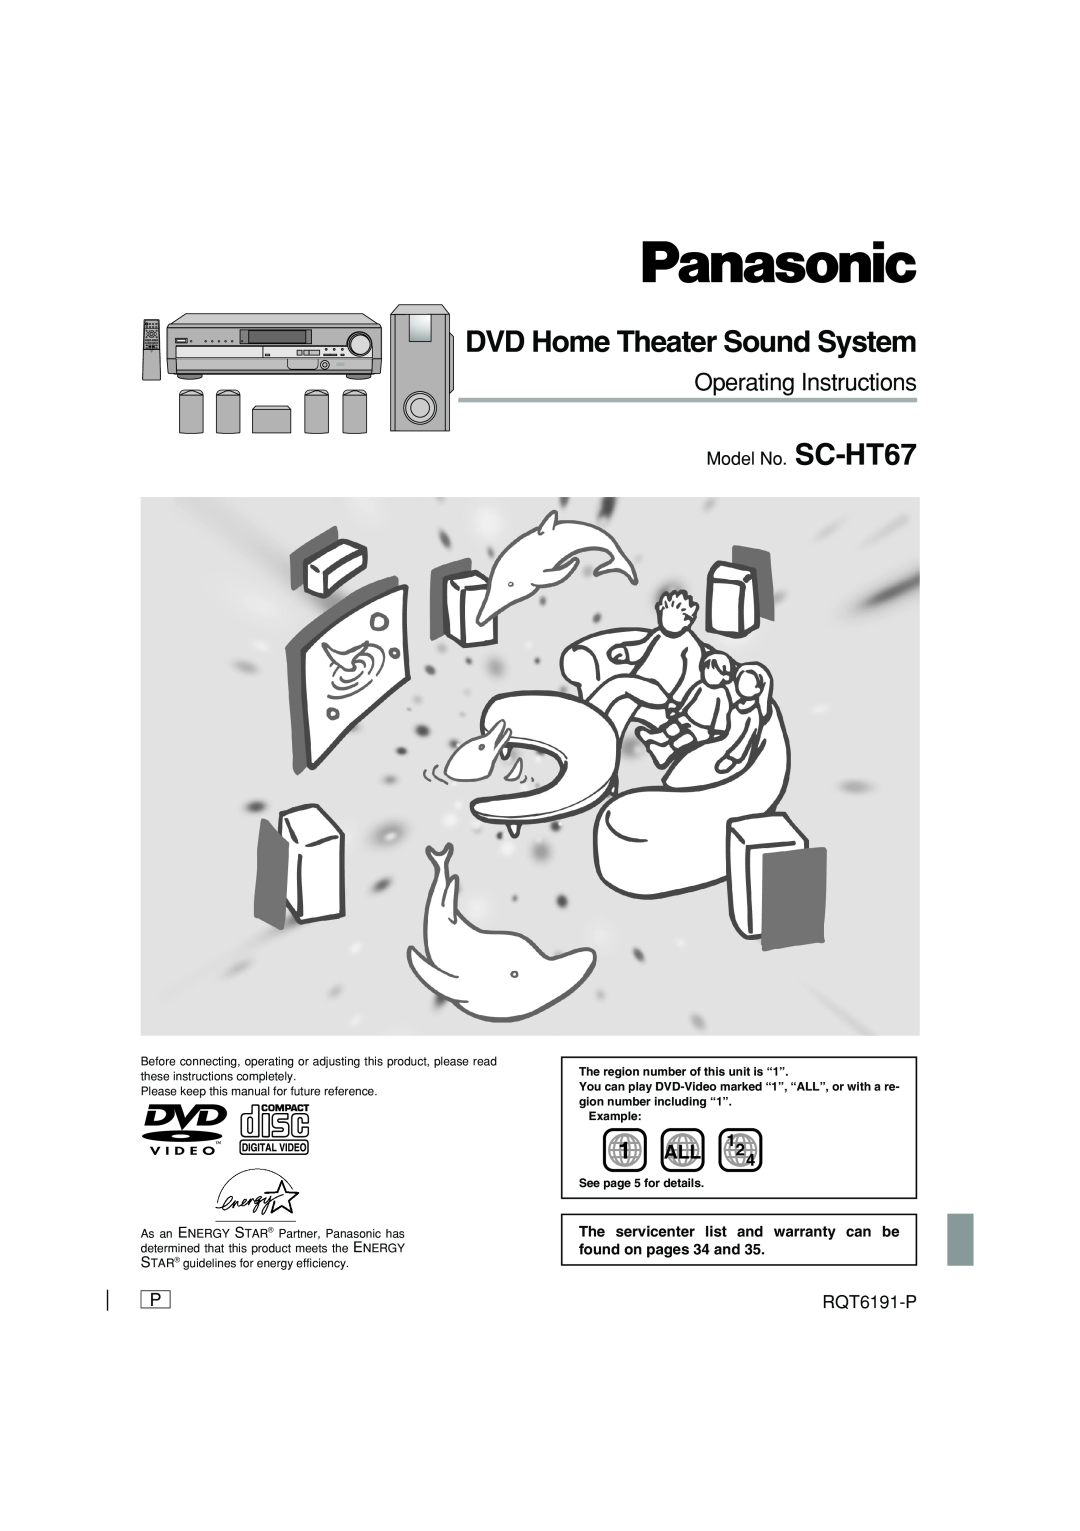 Panasonic warranty 1ALL, Model No. SC-HT67, RQT6191-P, DVD Home Theater Sound System, Operating Instructions 